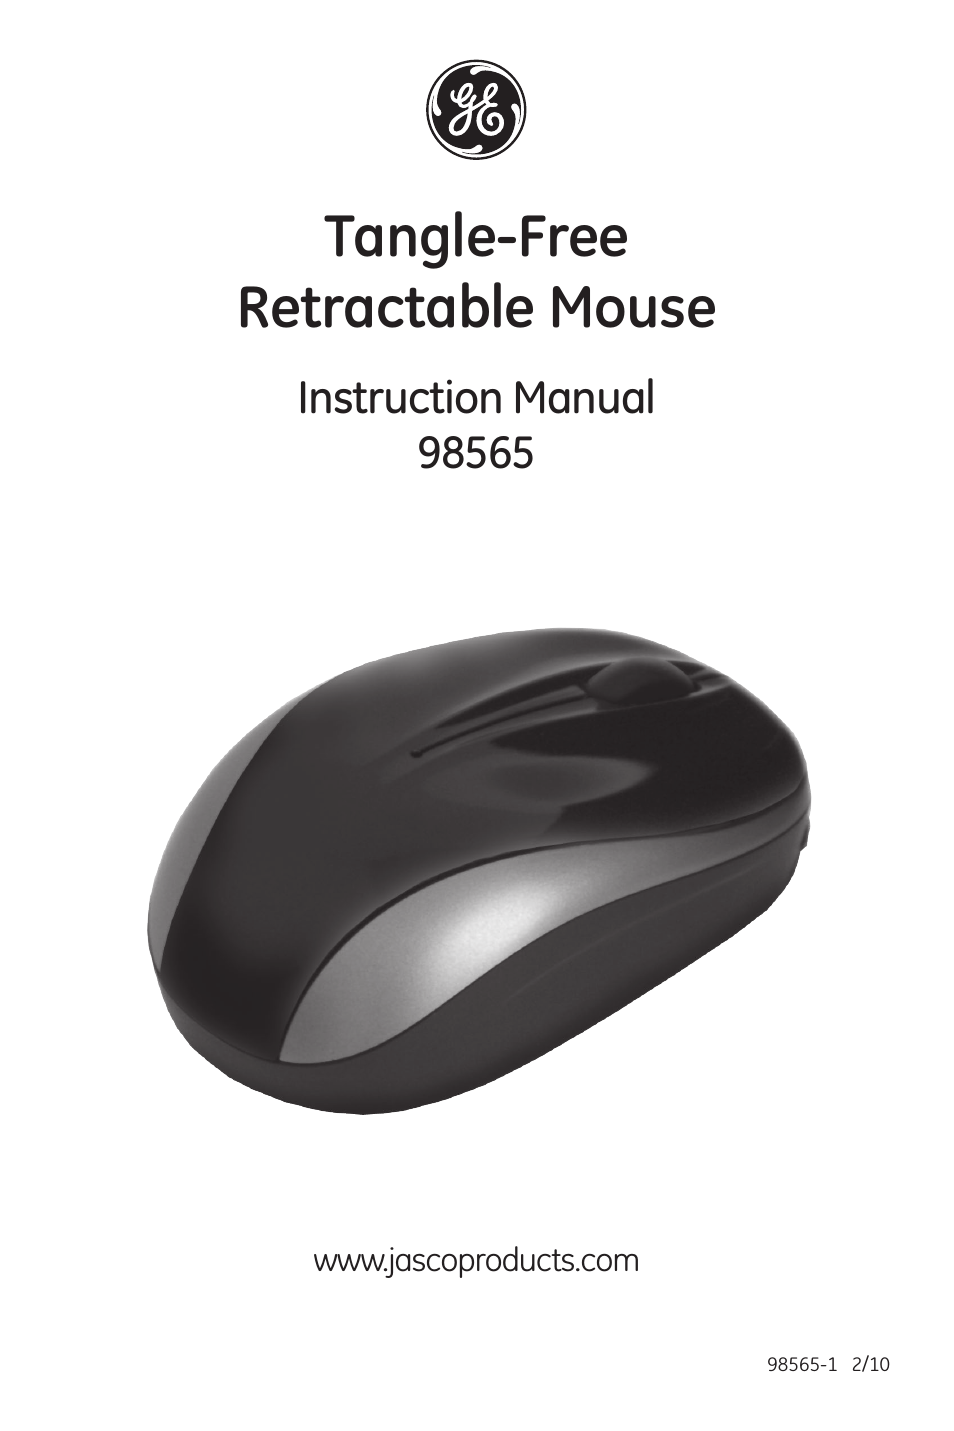 98565 GE Tangle-Free Retractable Mouse